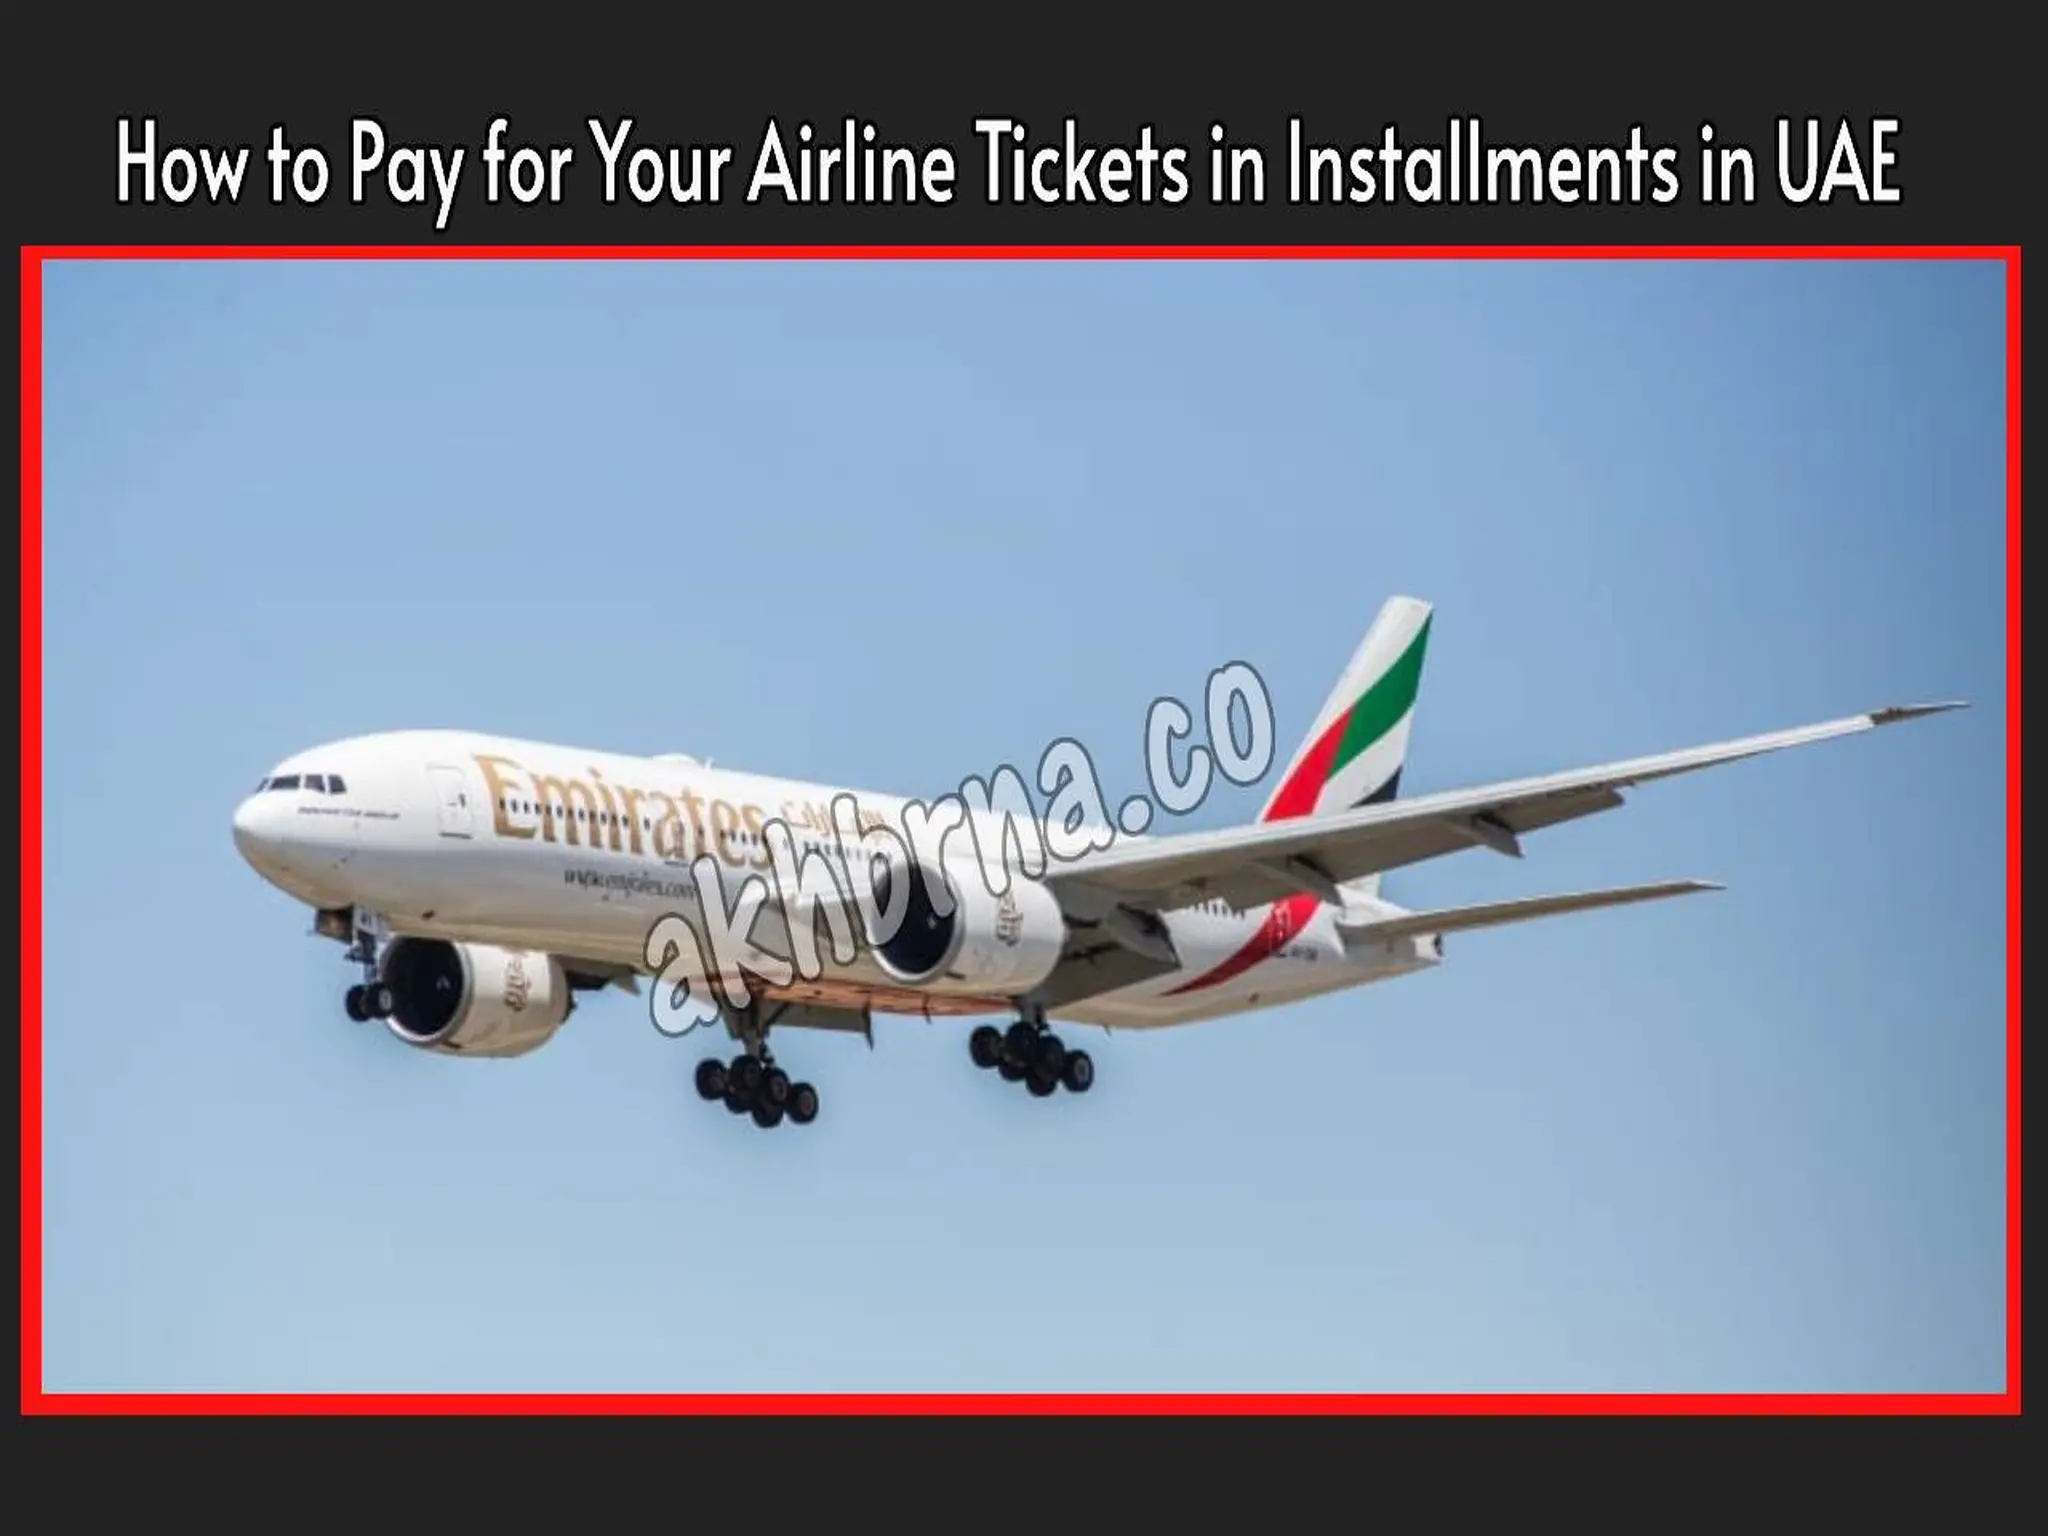 How to Pay for Your Airline Tickets in Installments in UAE?